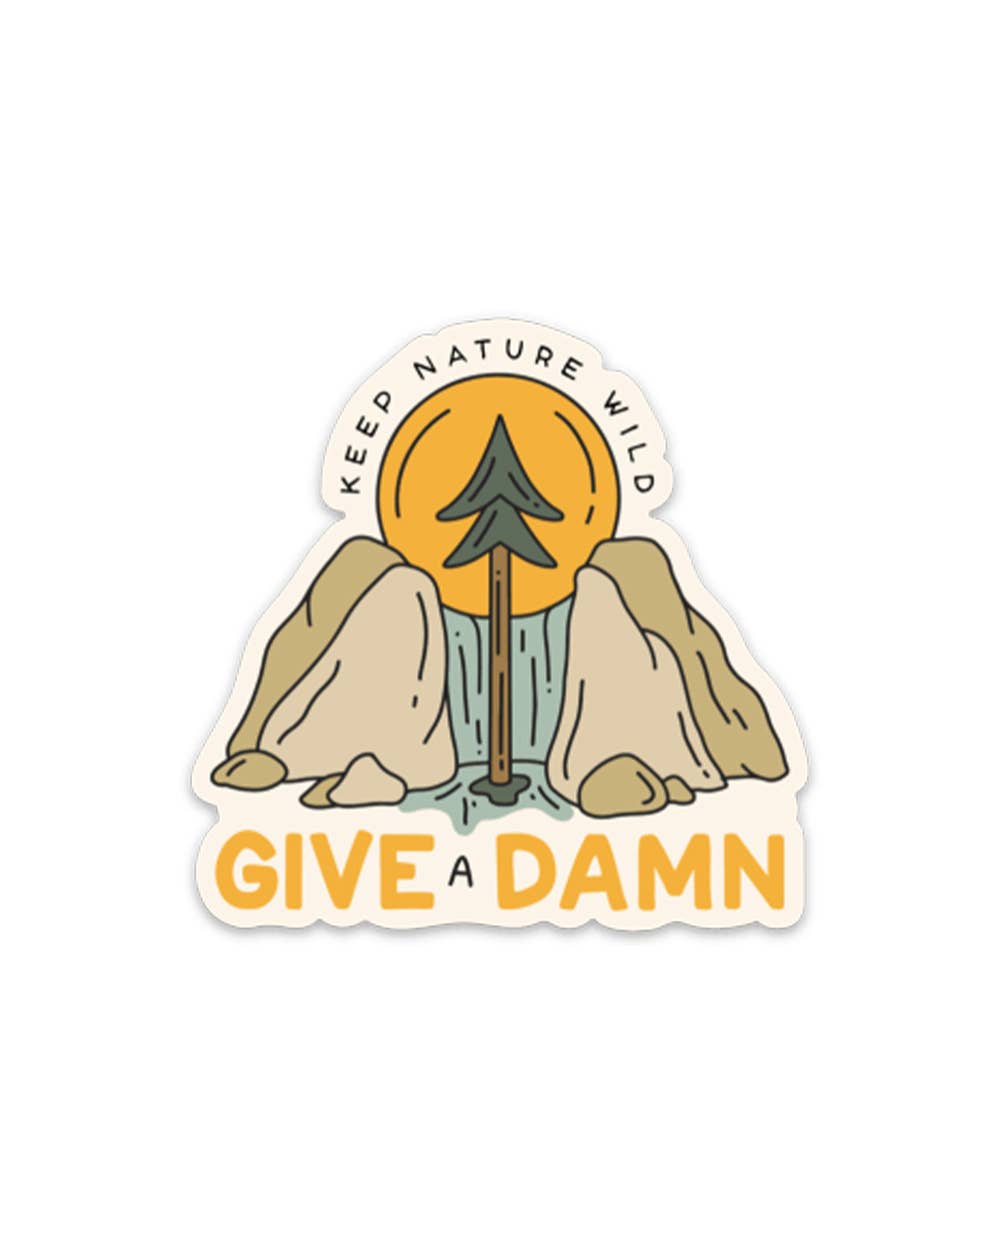 Give a Damn waterfall sticker by Keep Nature Wild